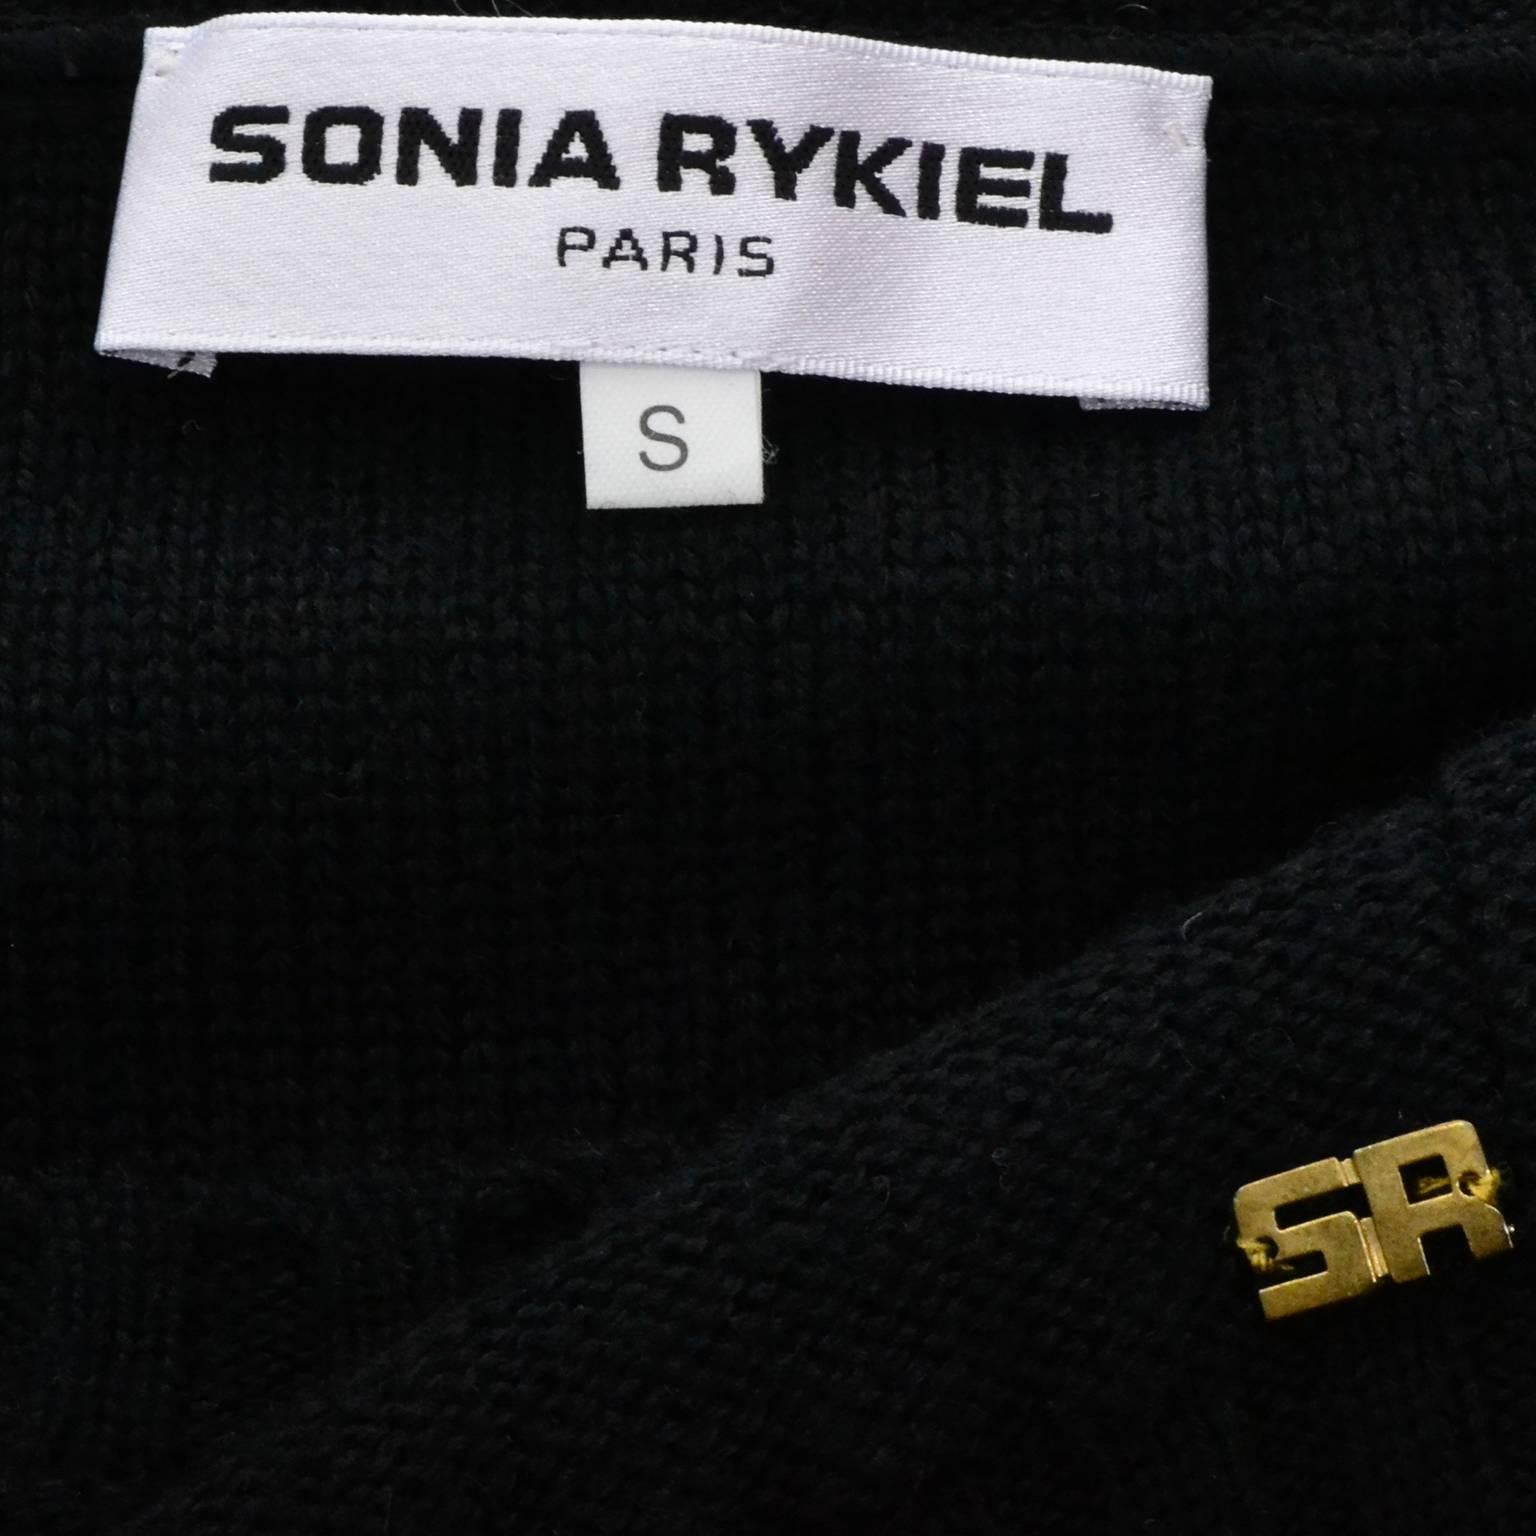 Women's Sonia Rykiel Vintage Sweater With Sequins & Peek A Boo Sleeves Made in France For Sale